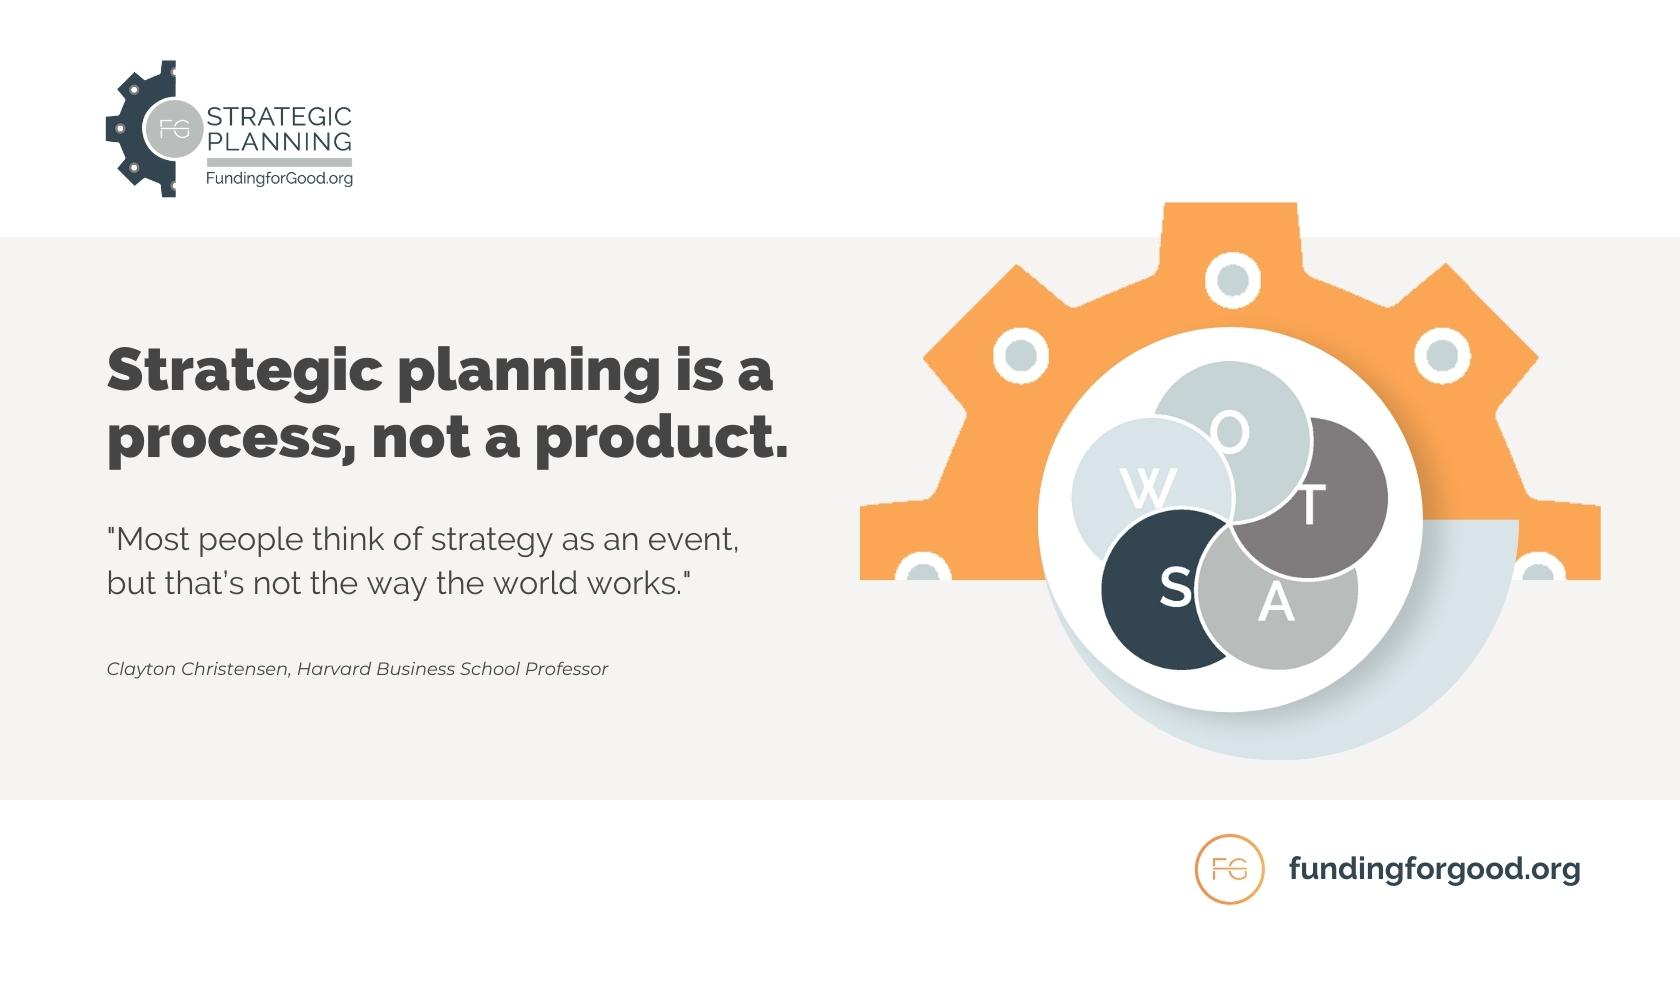 Two strategic planning quotes: "Strategic planning is a process, not a product," by Funding for Good; and "Most people think of strategy as an event, but that's not the way the world works," from Clayton Christensen, Harvard Business School Professor.